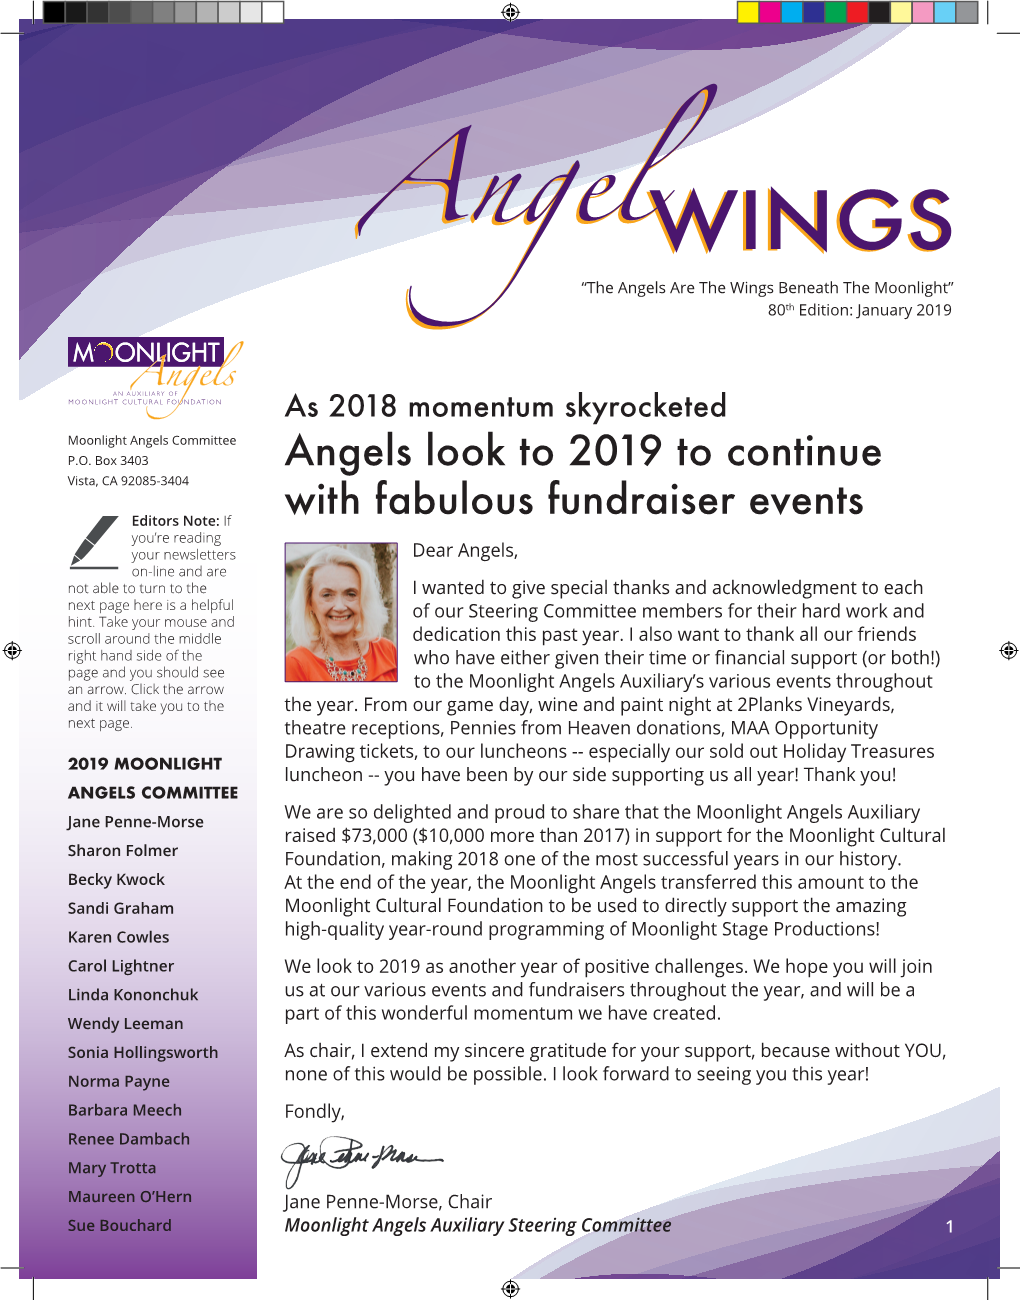 Angels Look to 2019 to Continue with Fabulous Fundraiser Events